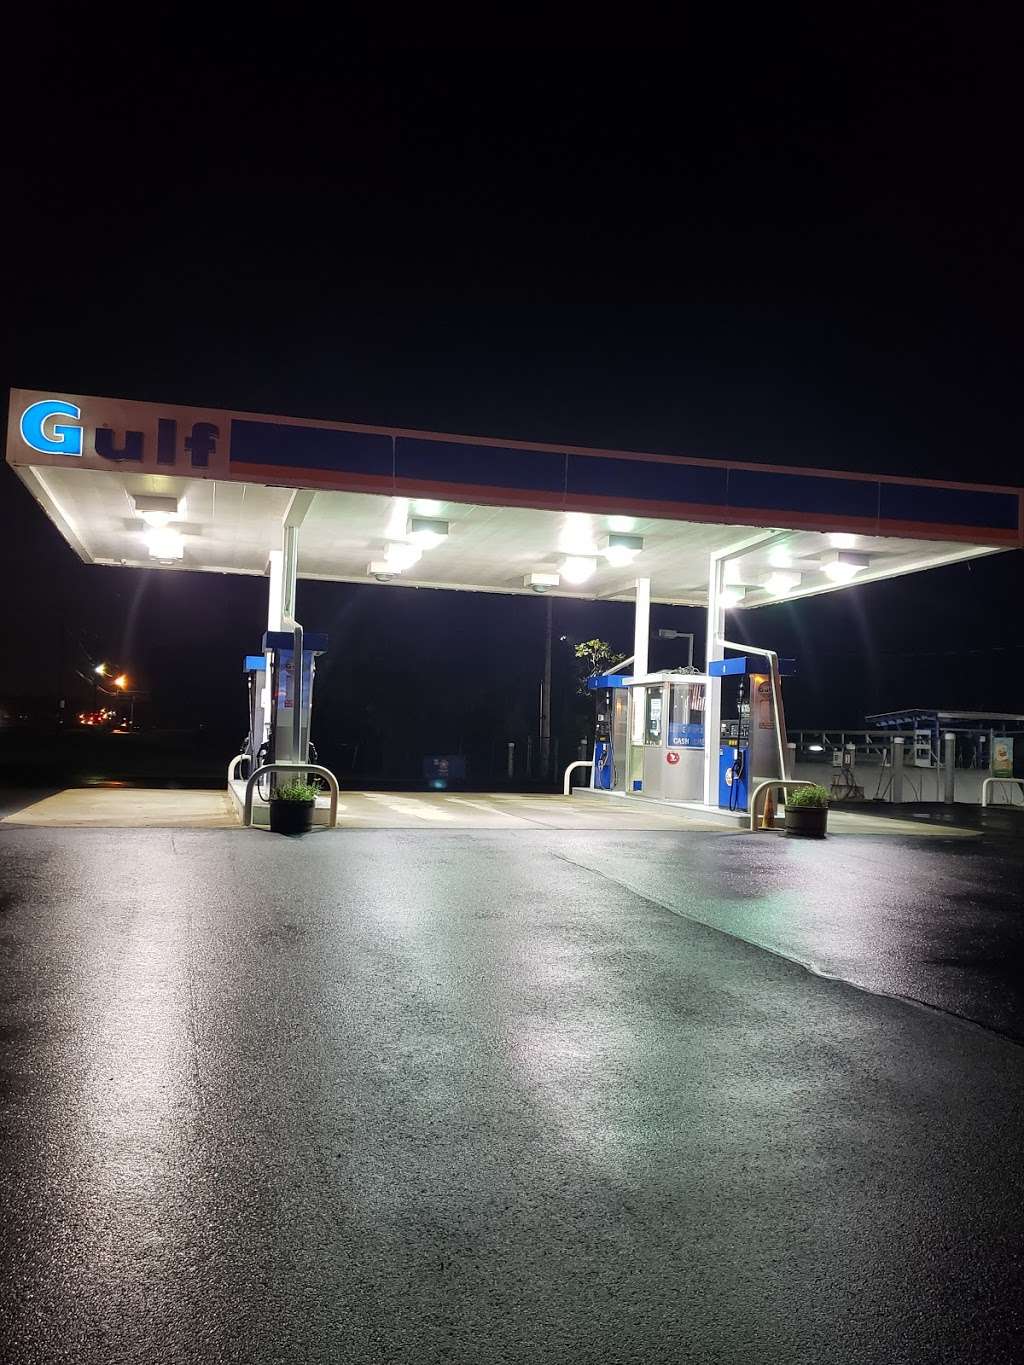 Gulf gas station | 413 route 22 east, Whitehouse Station, NJ 08889 | Phone: (908) 923-4288